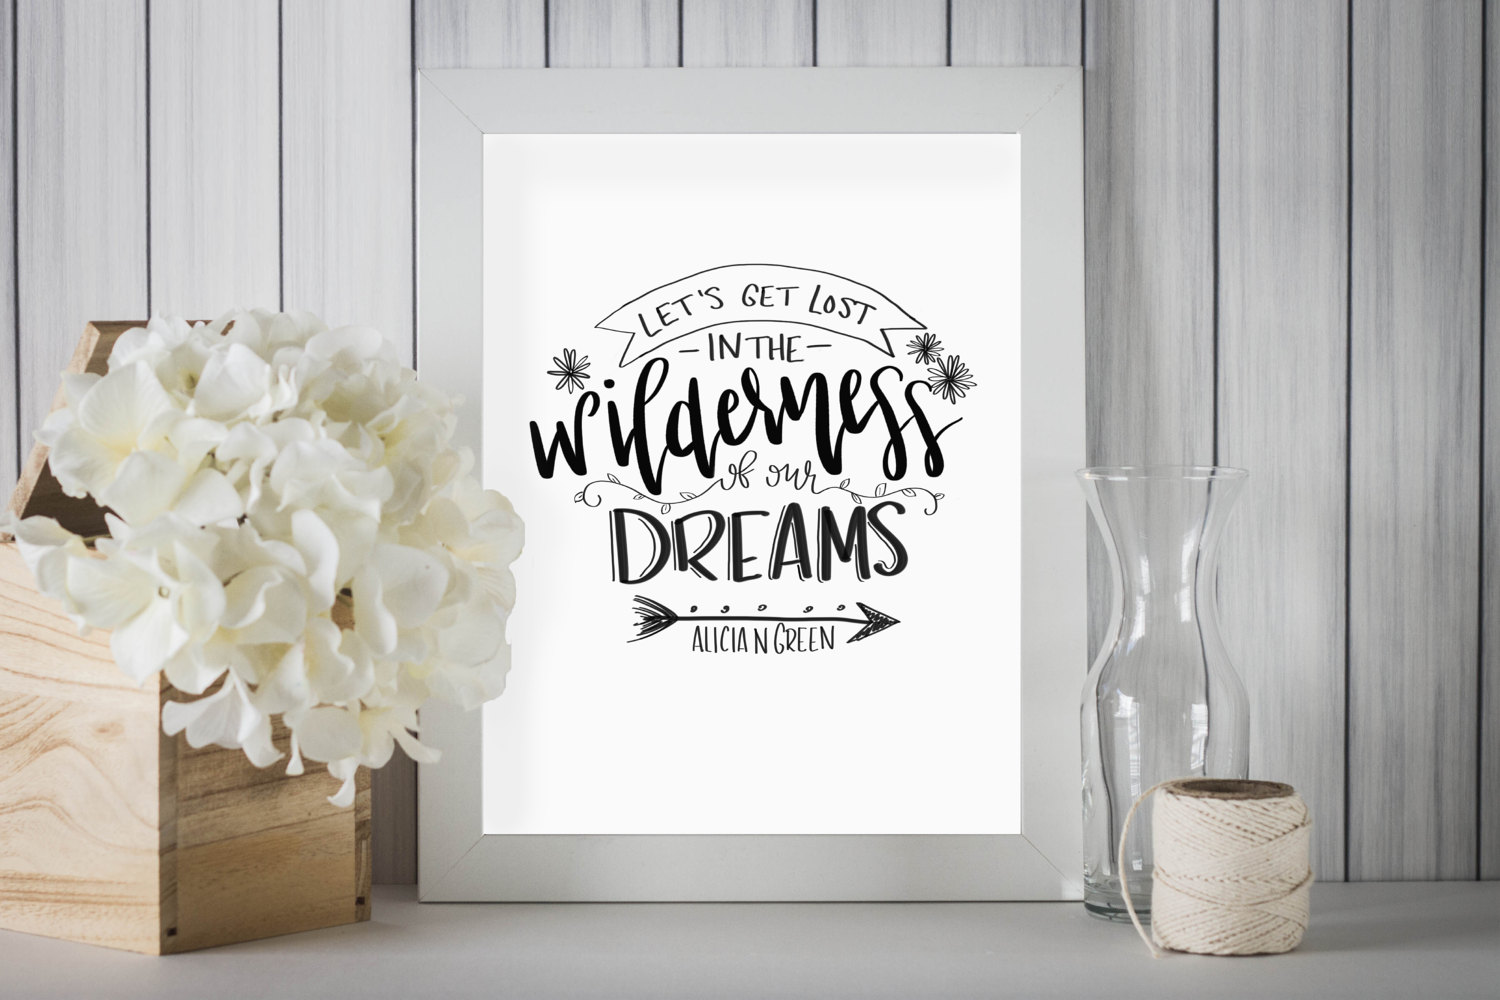 Hand Lettered Adventure Quote Print | Adventure Quotes | Hand Lettered Wall Decor | Wilderness Art Print | Bedroom Wall Decor